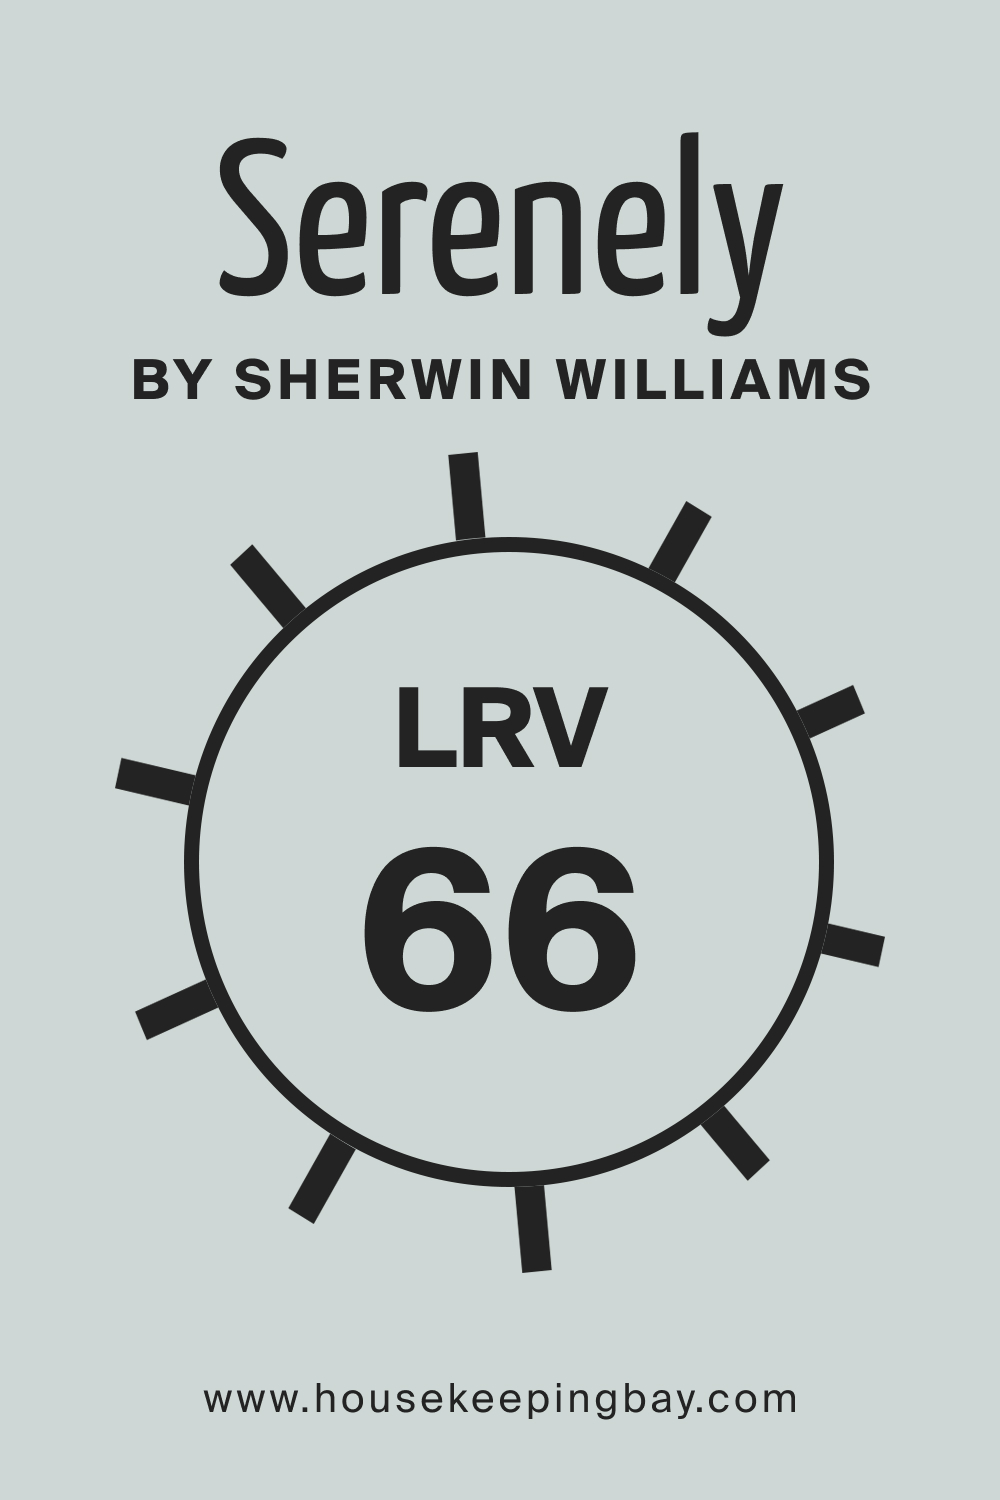 SW 9632 Serenely by Sherwin Williams. LRV 66